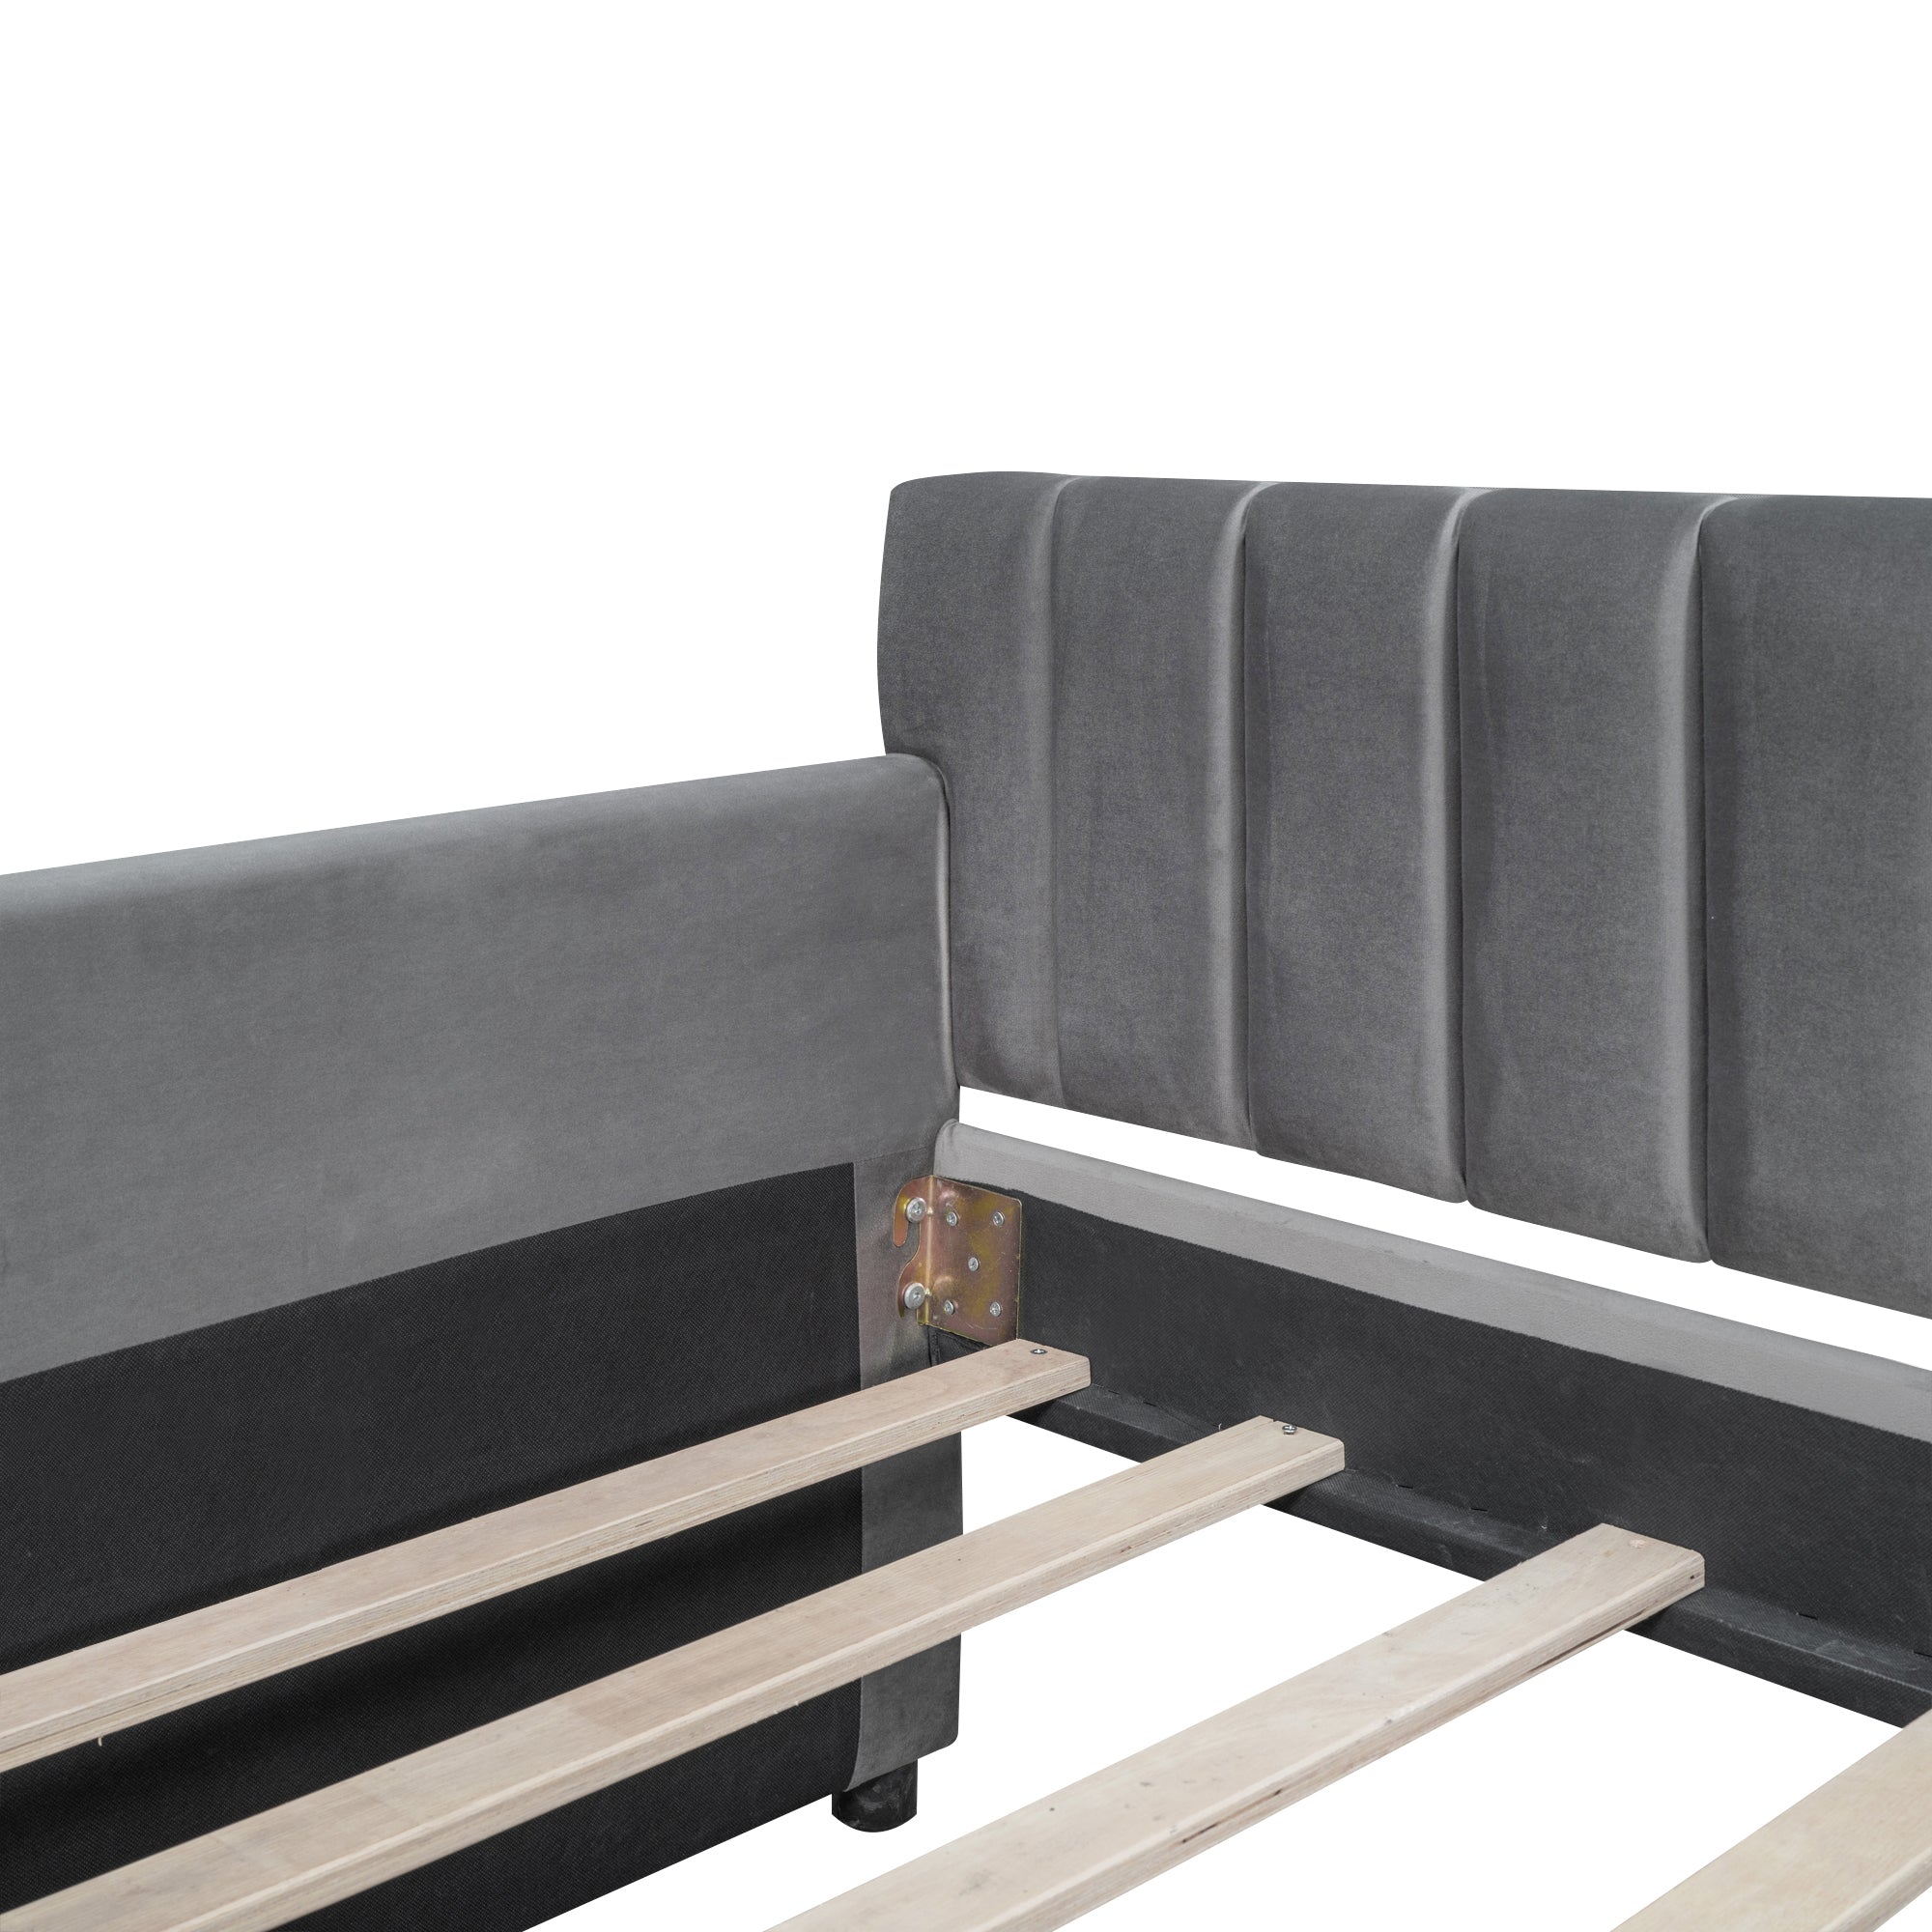 Raya Gray Velvet Twin Daybed with Storage Drawers